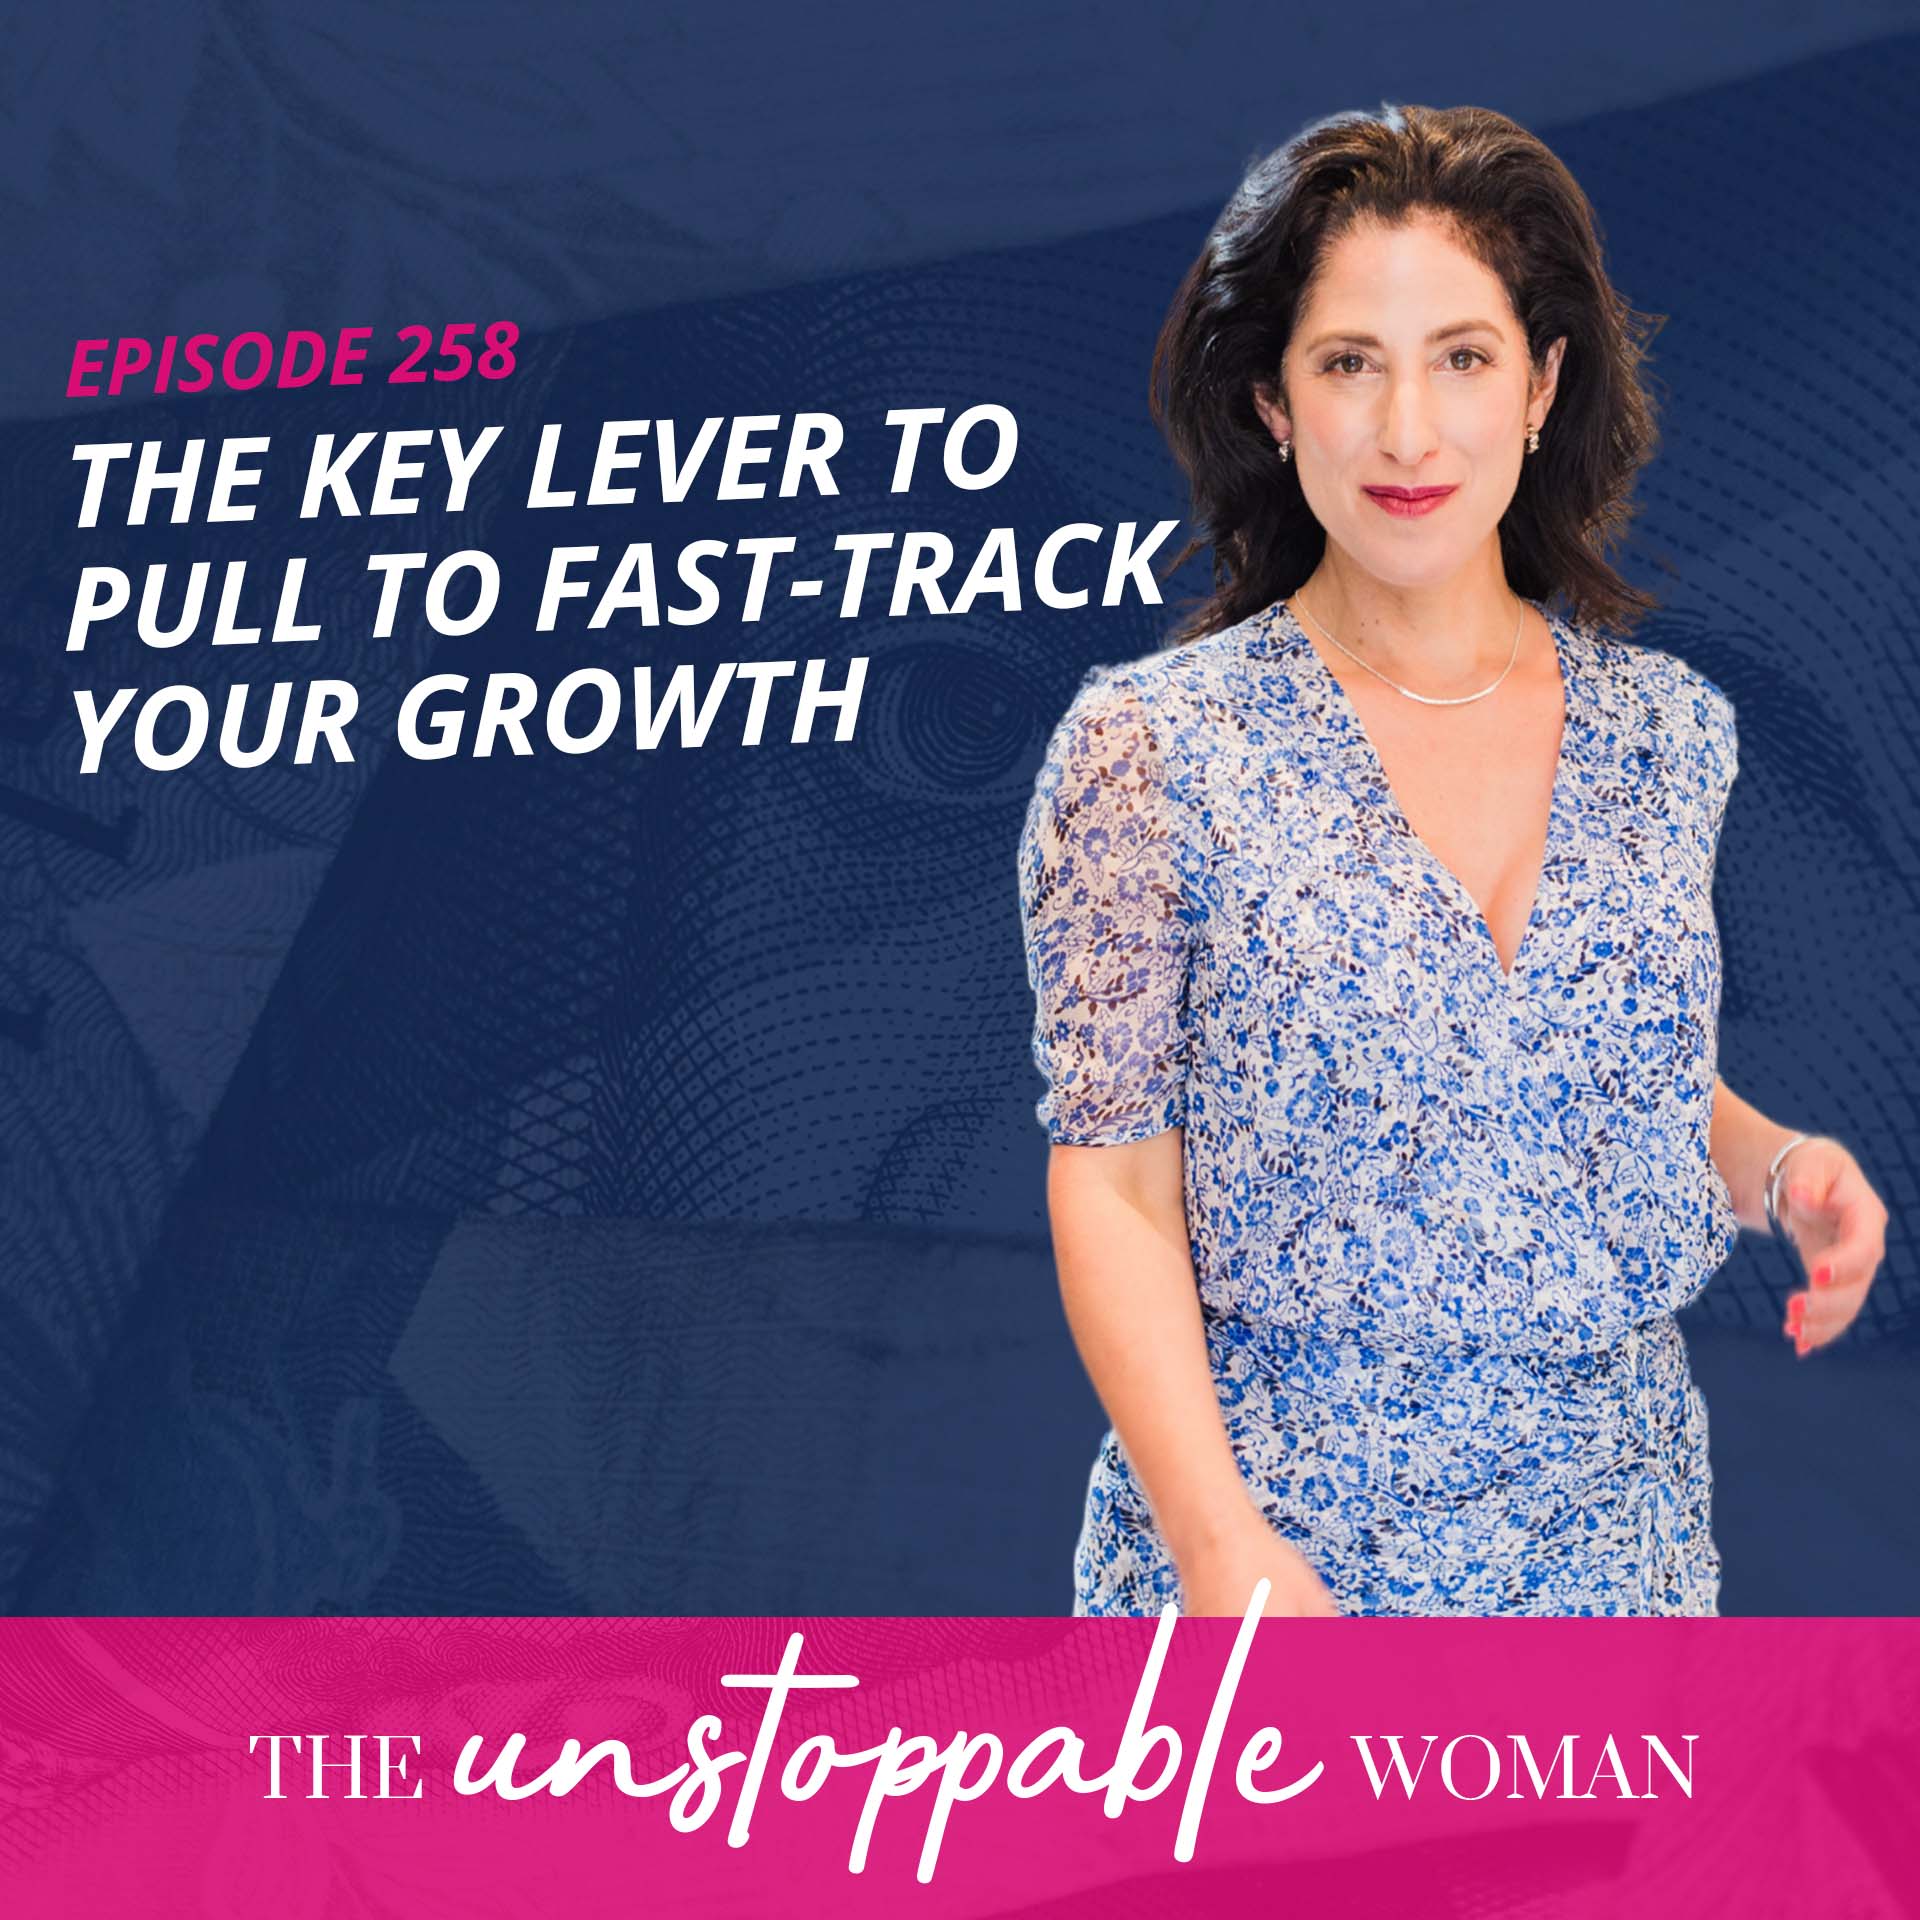 The Key Lever To Pull To Fast-Track Your Growth